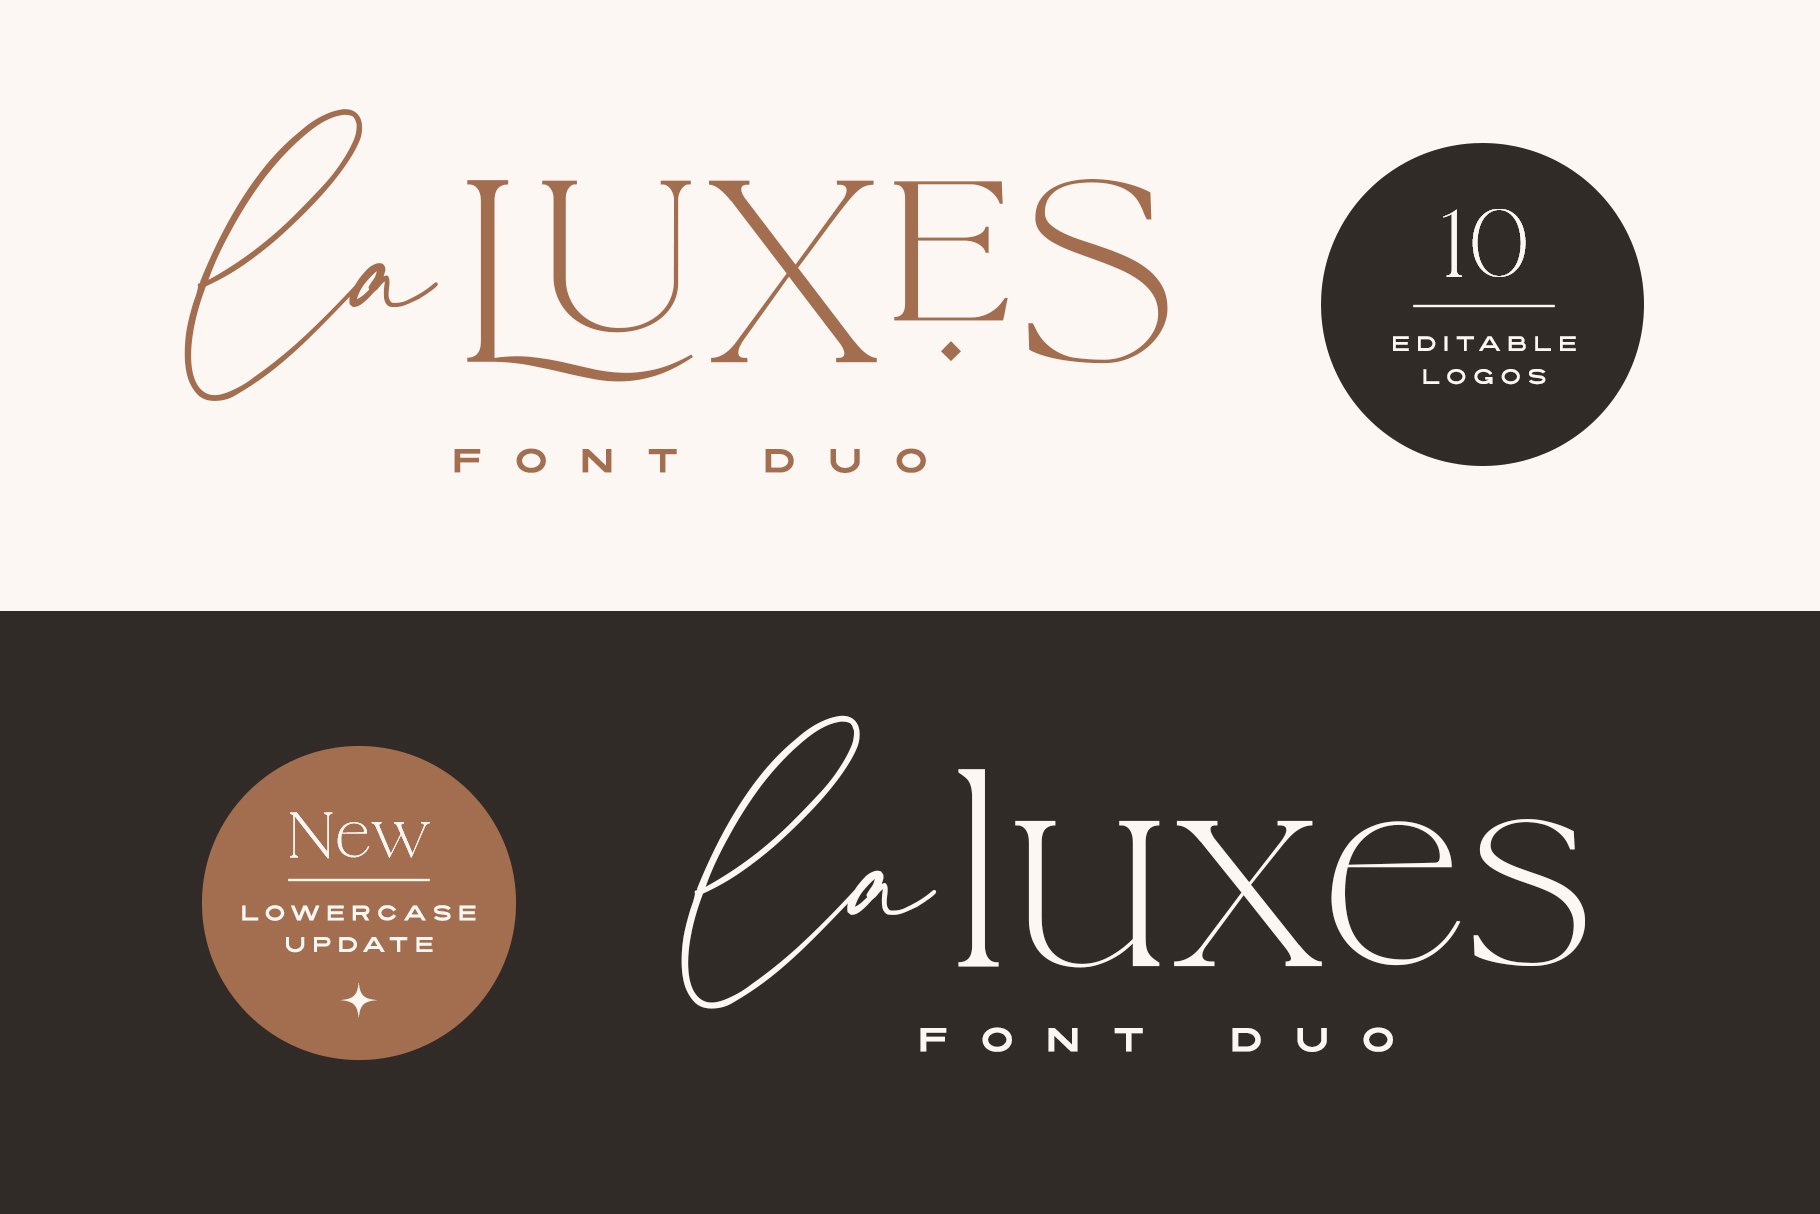 La Luxes Font Duo + Logos (Updated!) cover image.